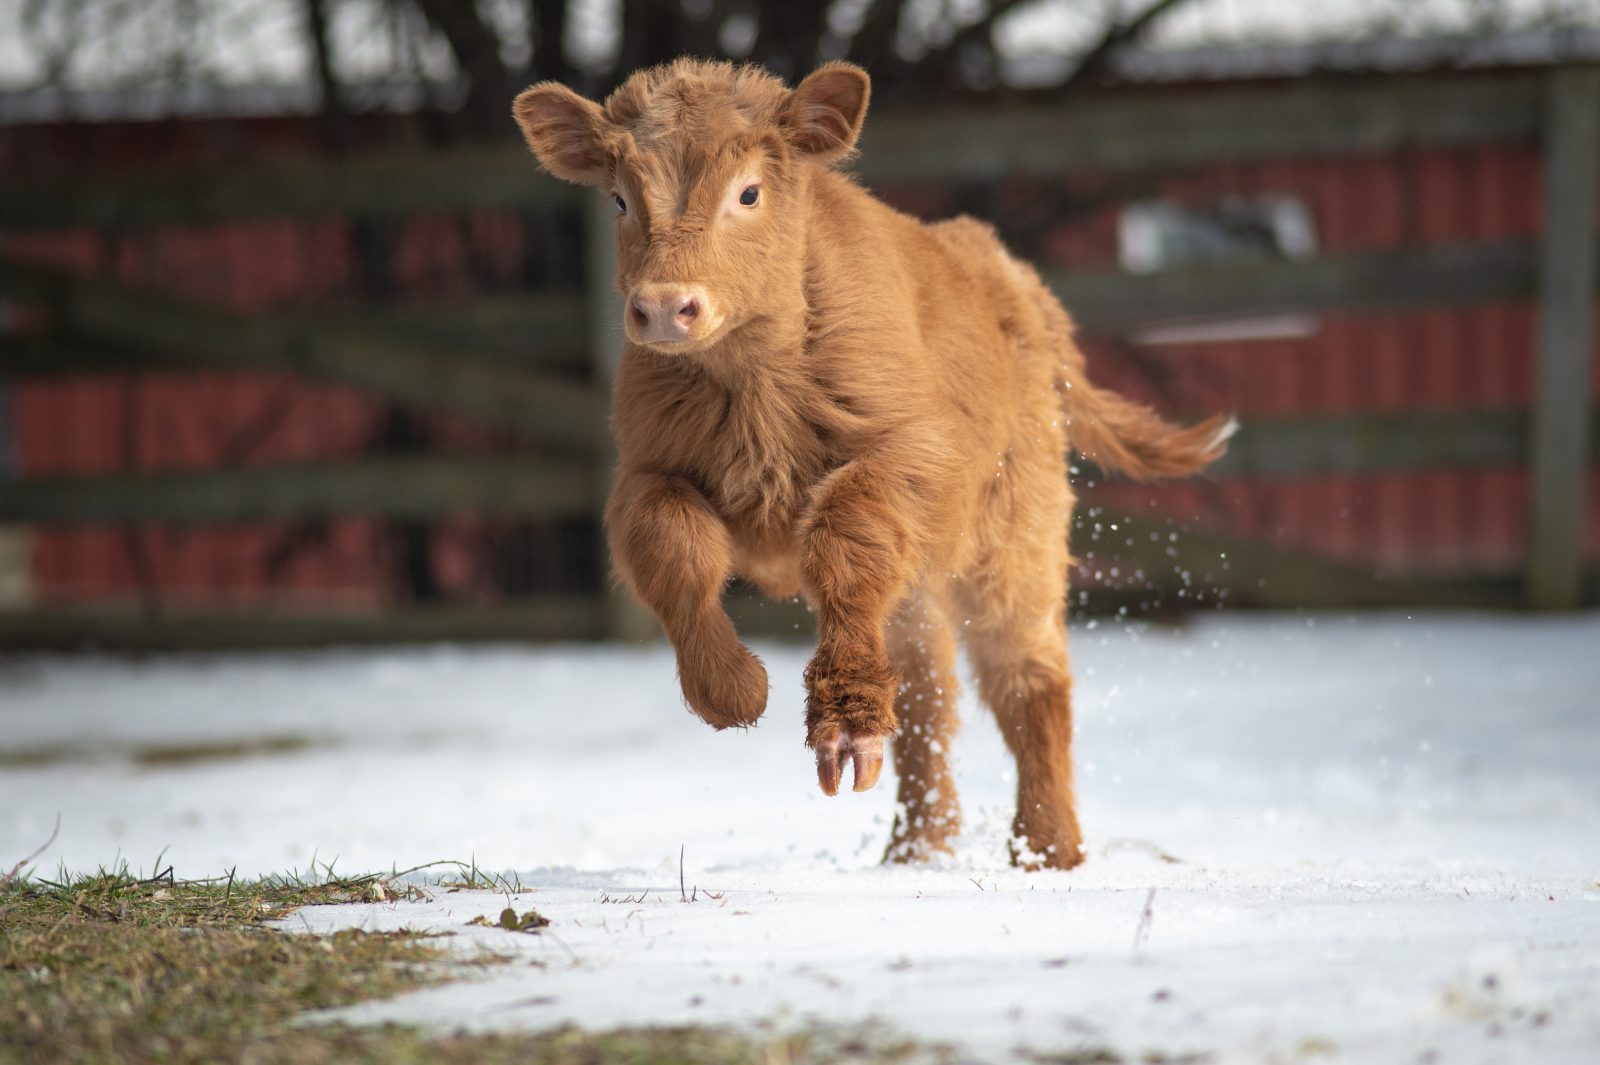 Bruce calf running playing in snow